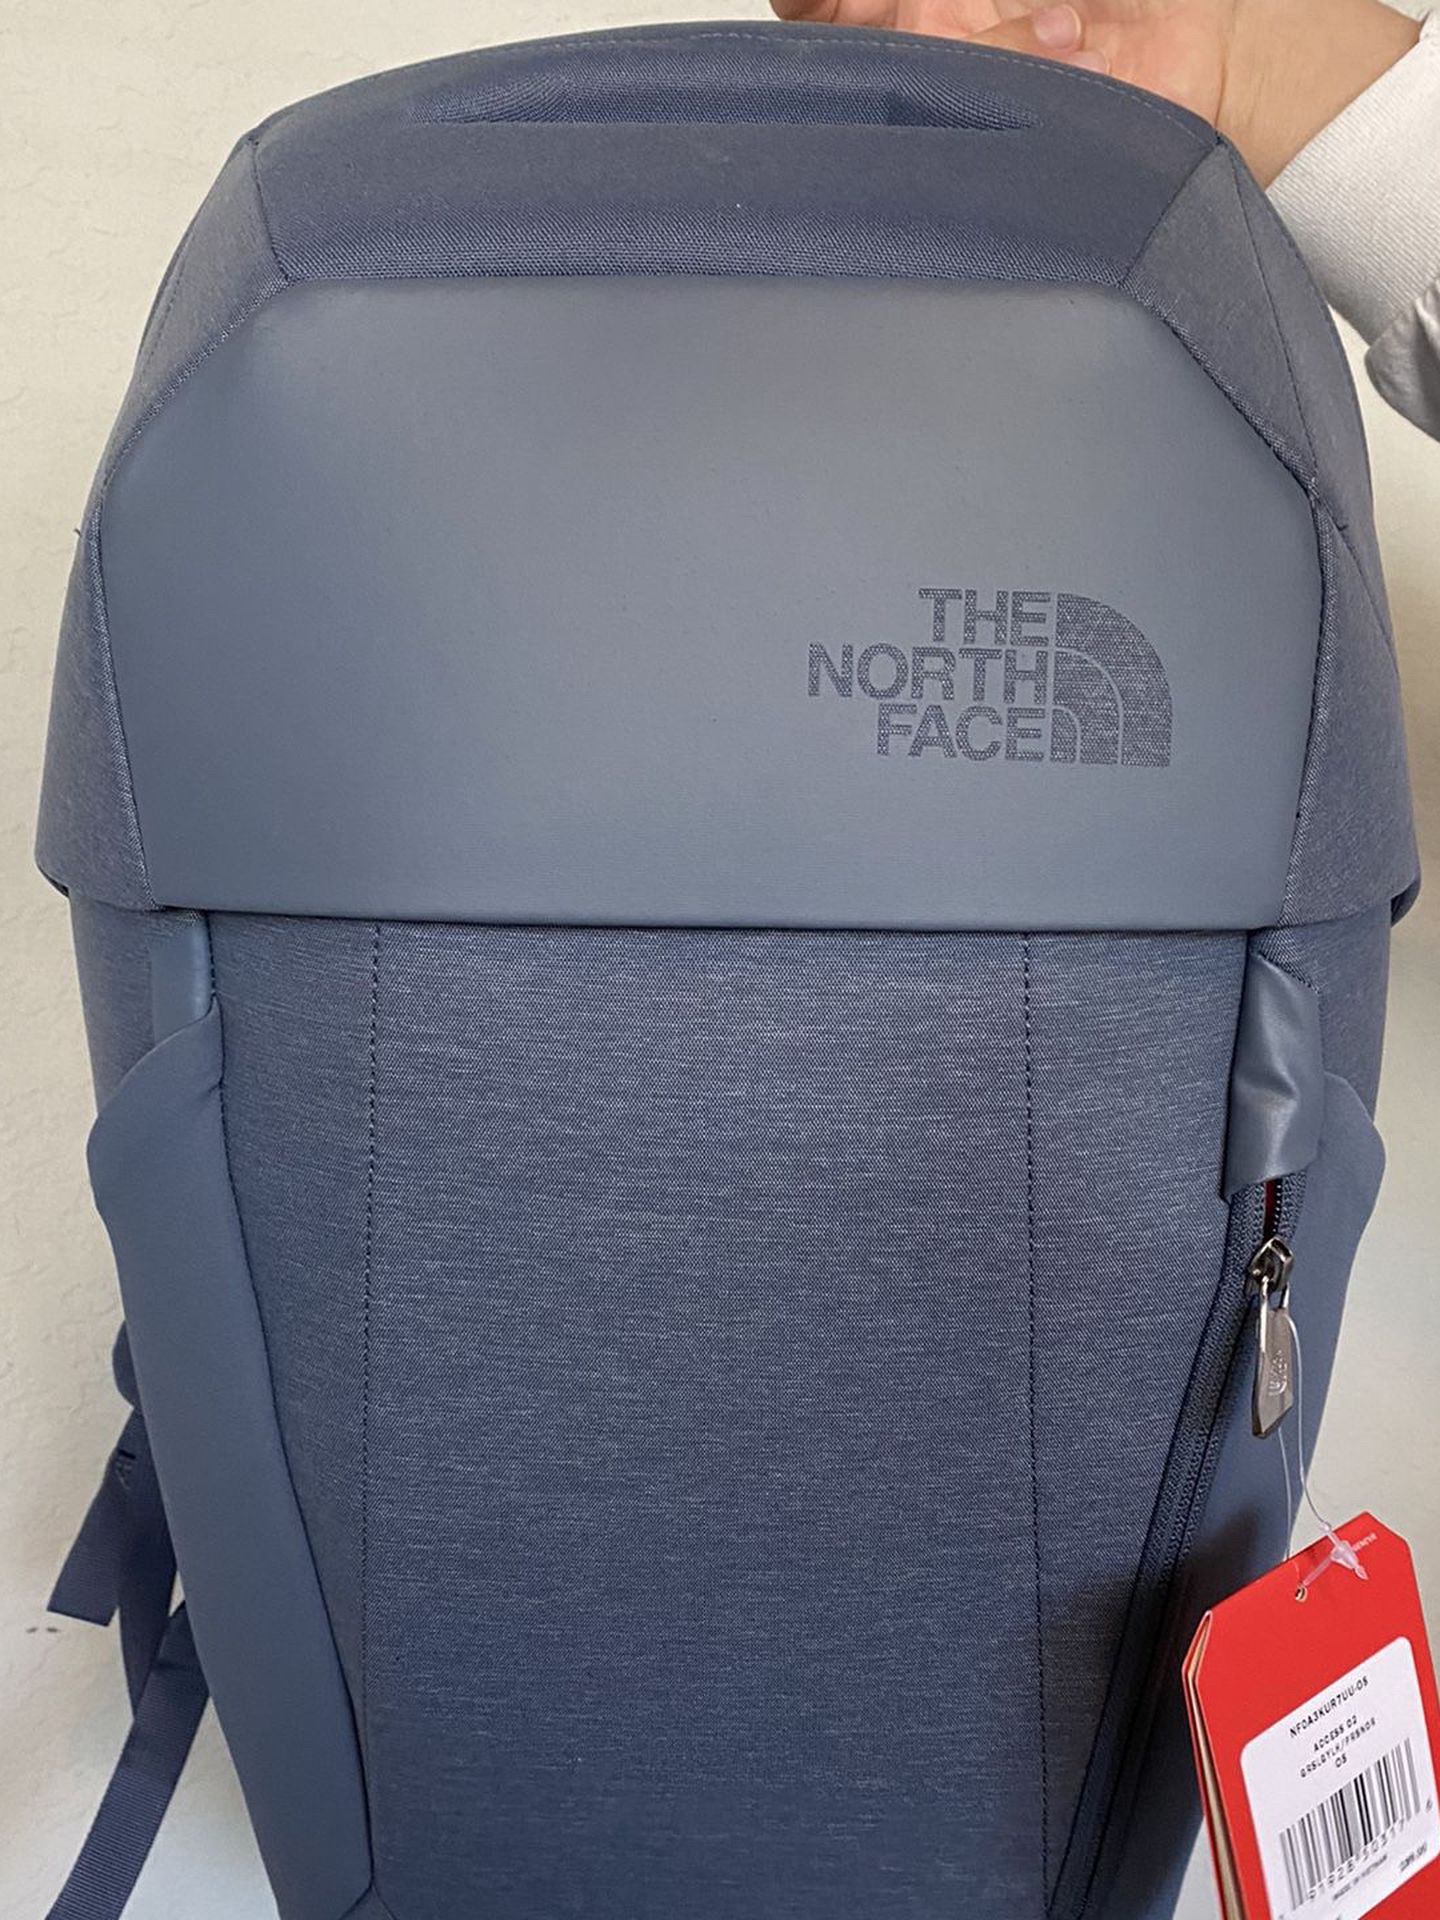 NEW NORTH FACE BACK PACK